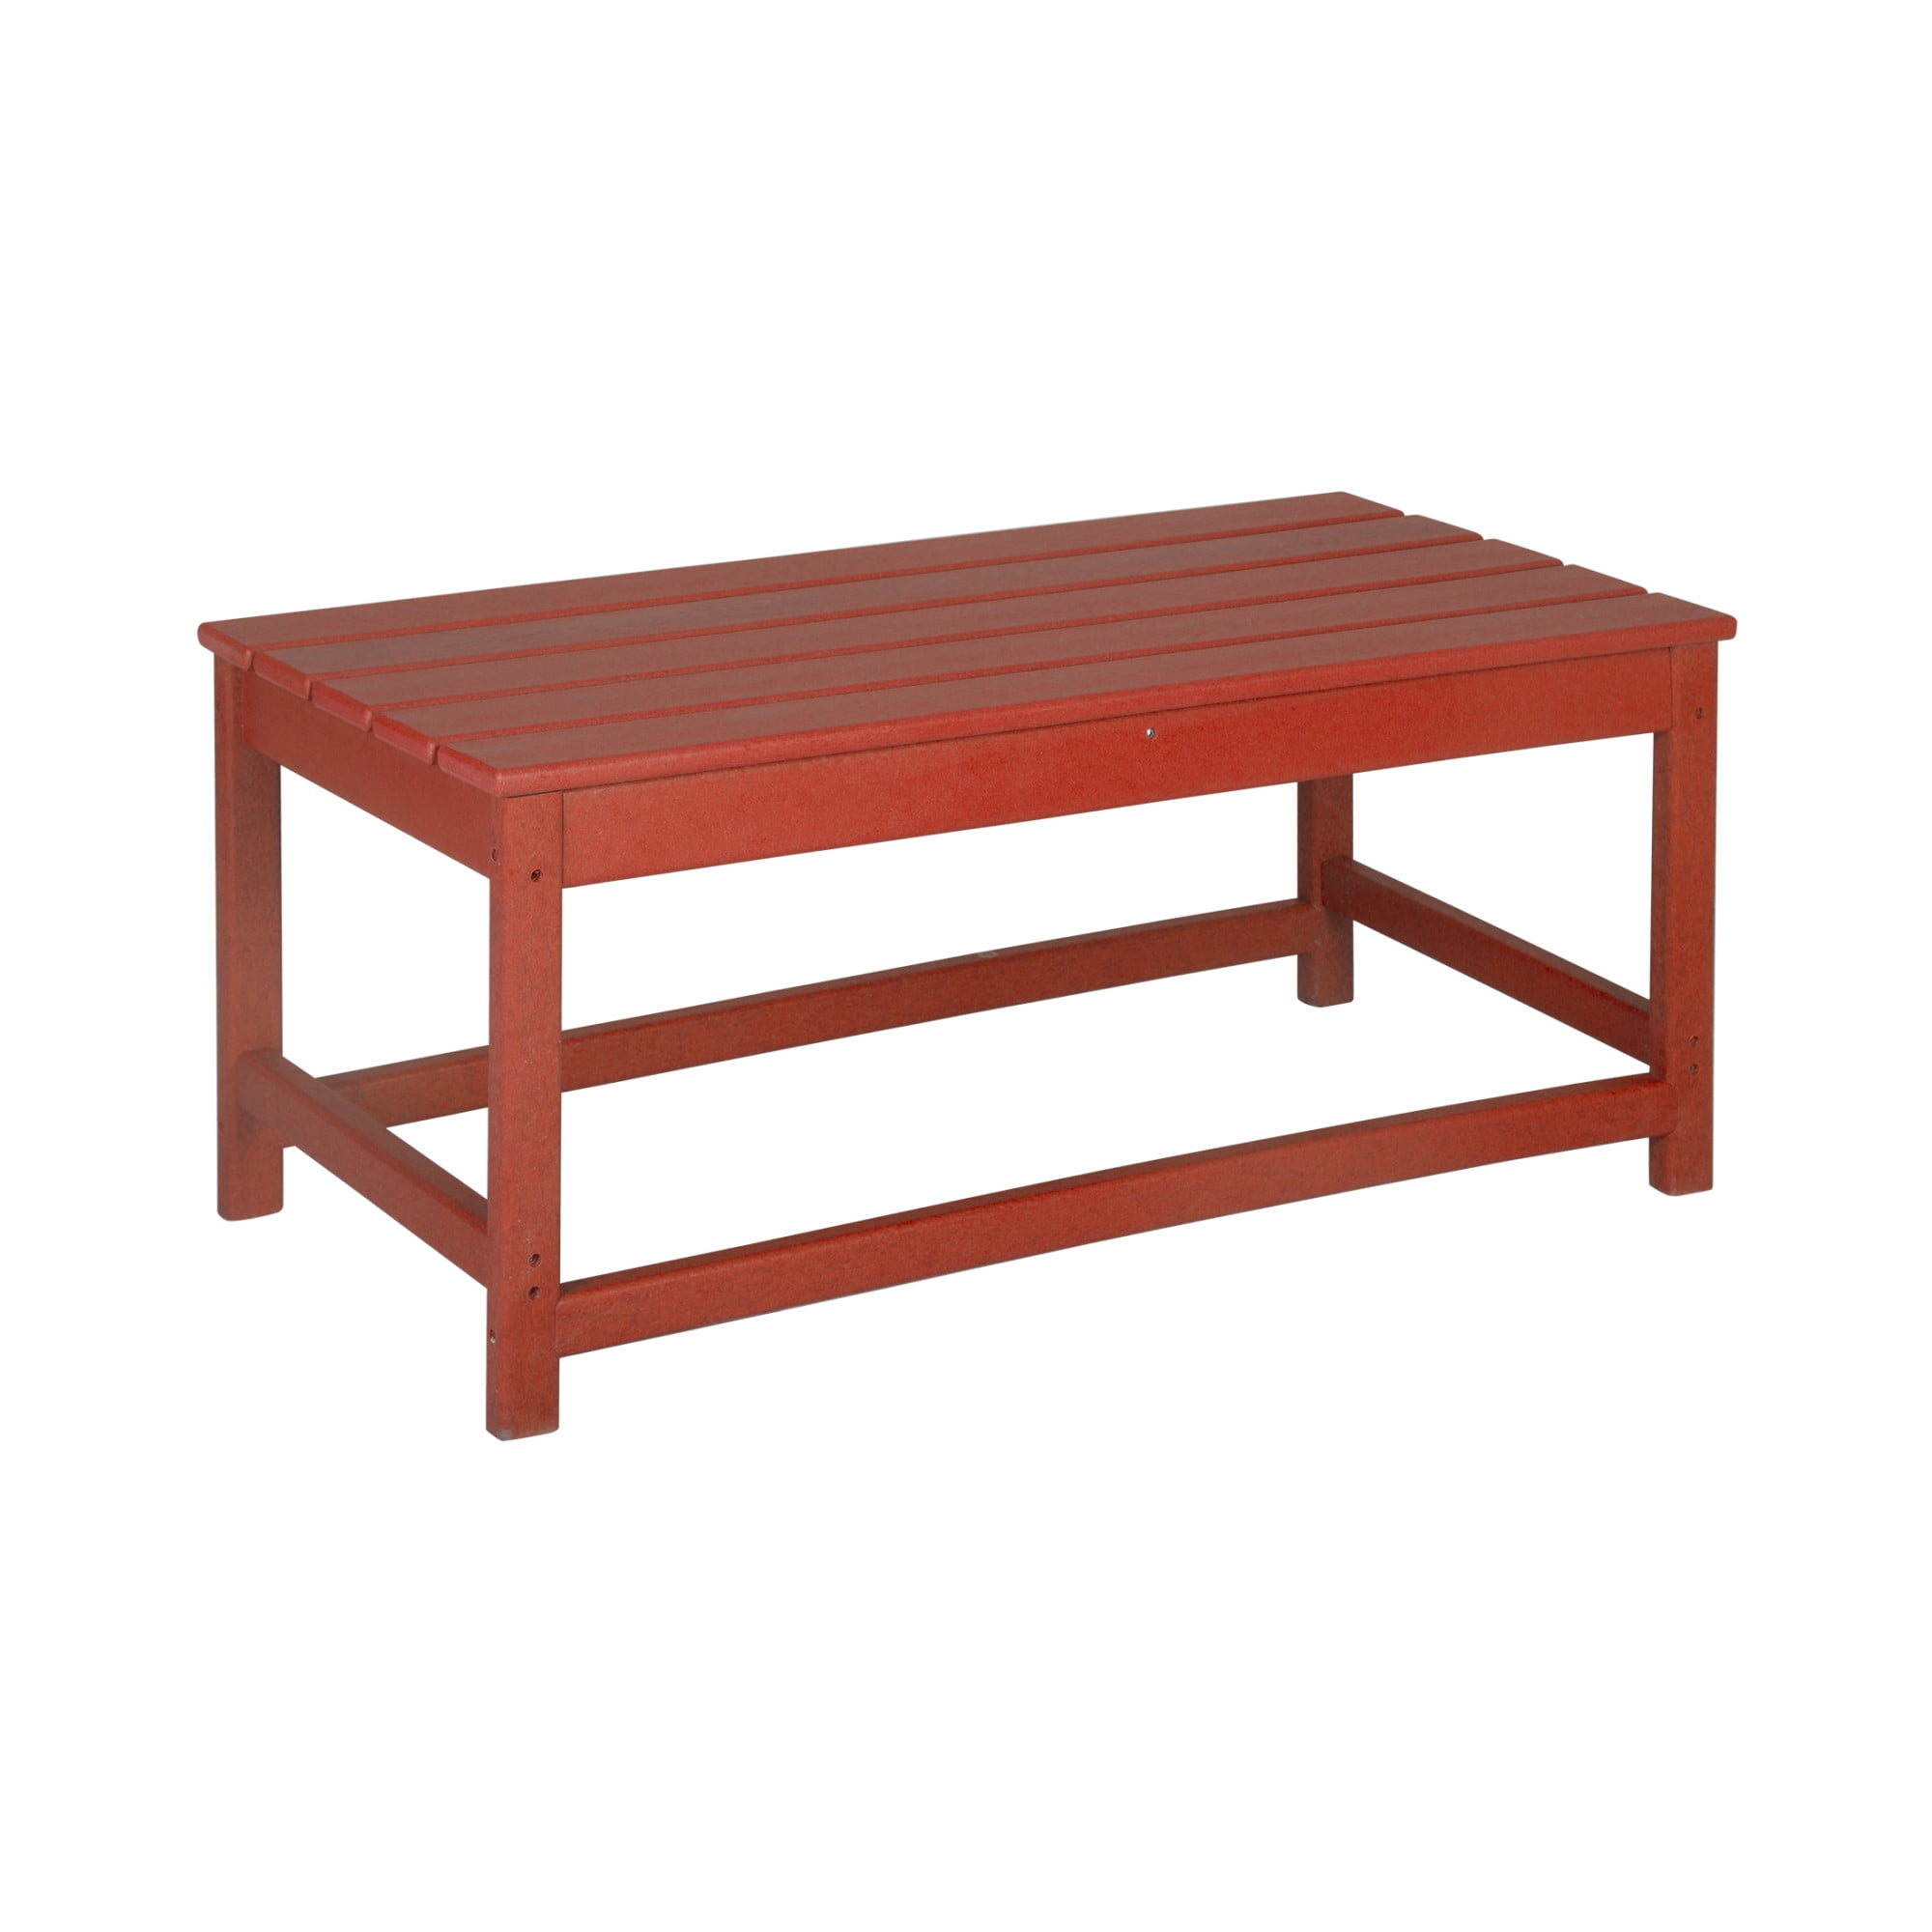 Westintrends Outdoor Patio Classic Adirondack Coffee Table, Red